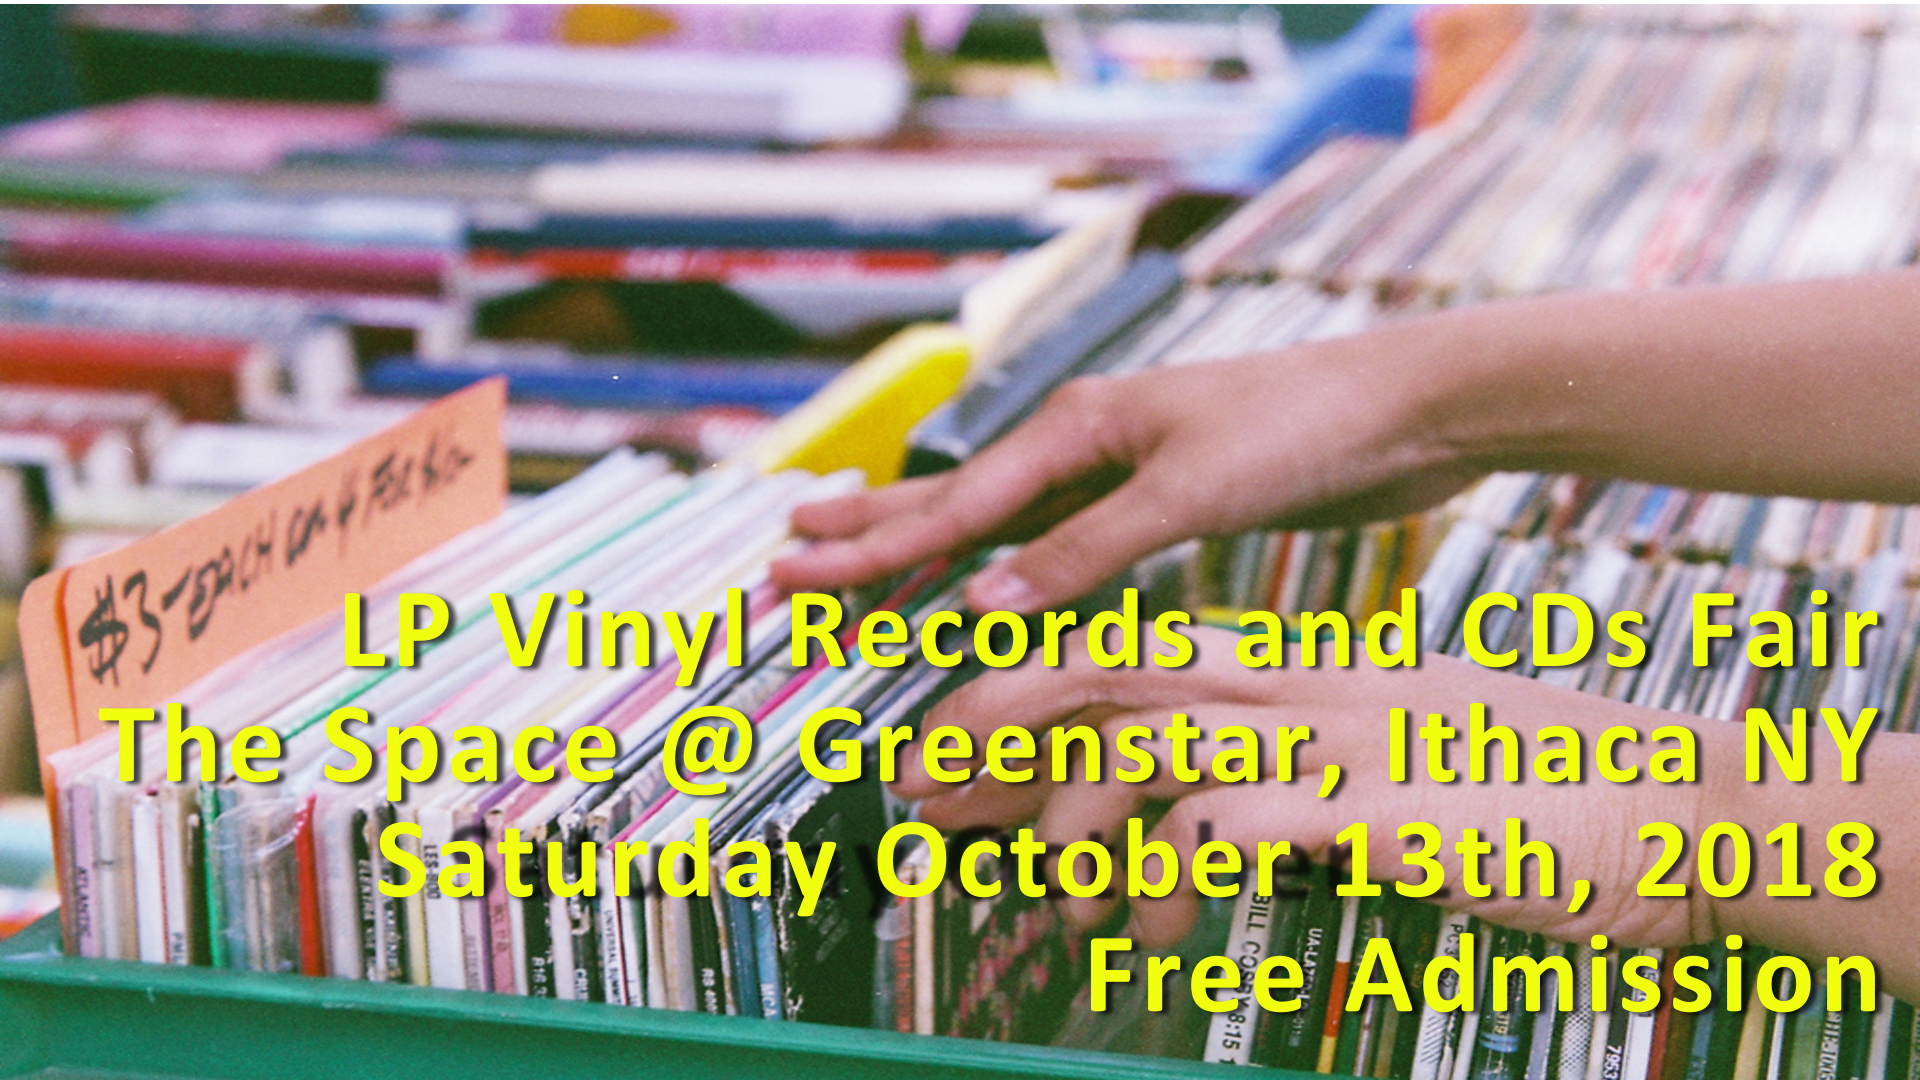 Ithaca, NY – LP Vinyl Records and CDs Show – Saturday October 13th, 2018 – Free Admission